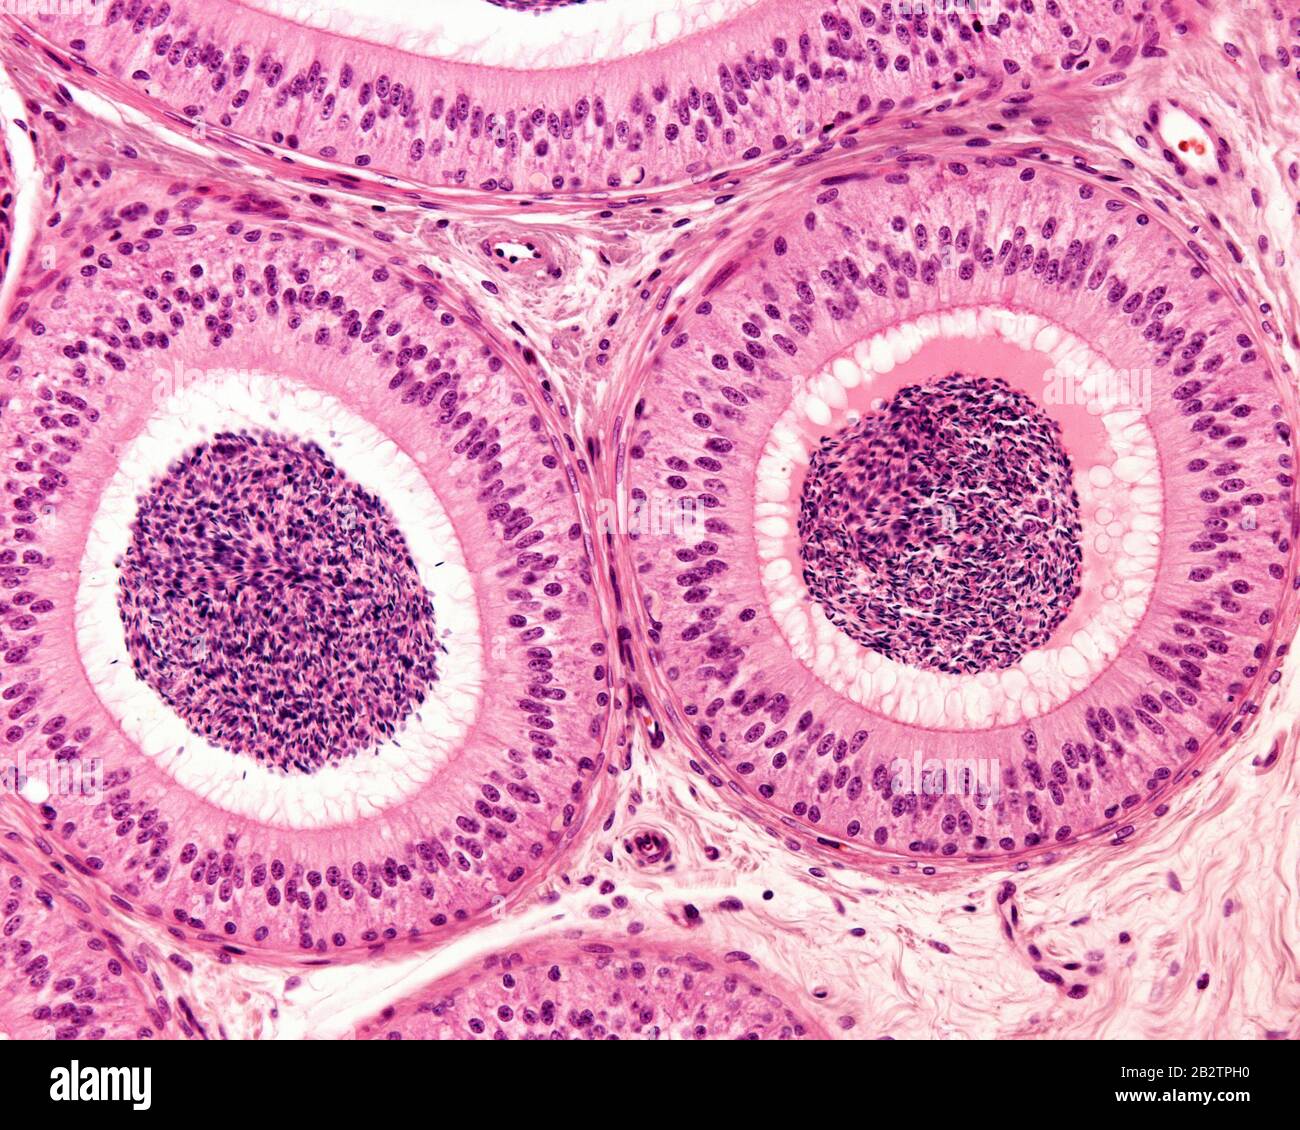 Two sections of the epididymal duct surrounded by concentric layers of fibromuscular tissue. The pseudostratified epithelium consists of tall columnar Stock Photo